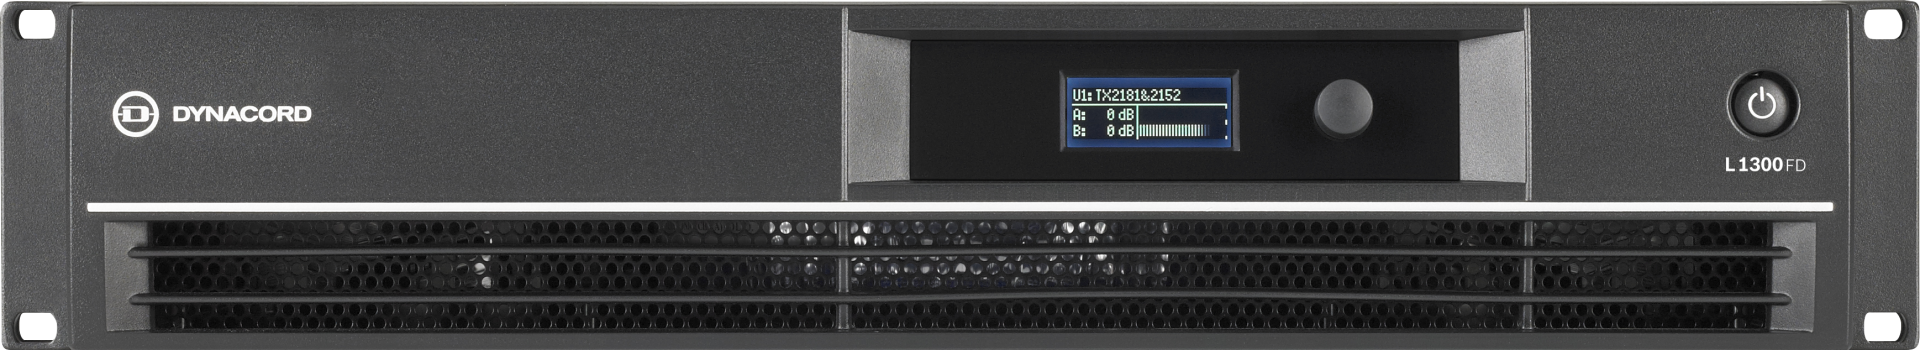 L1300FD DSP 2 x 650 w power amplifier for live performance 